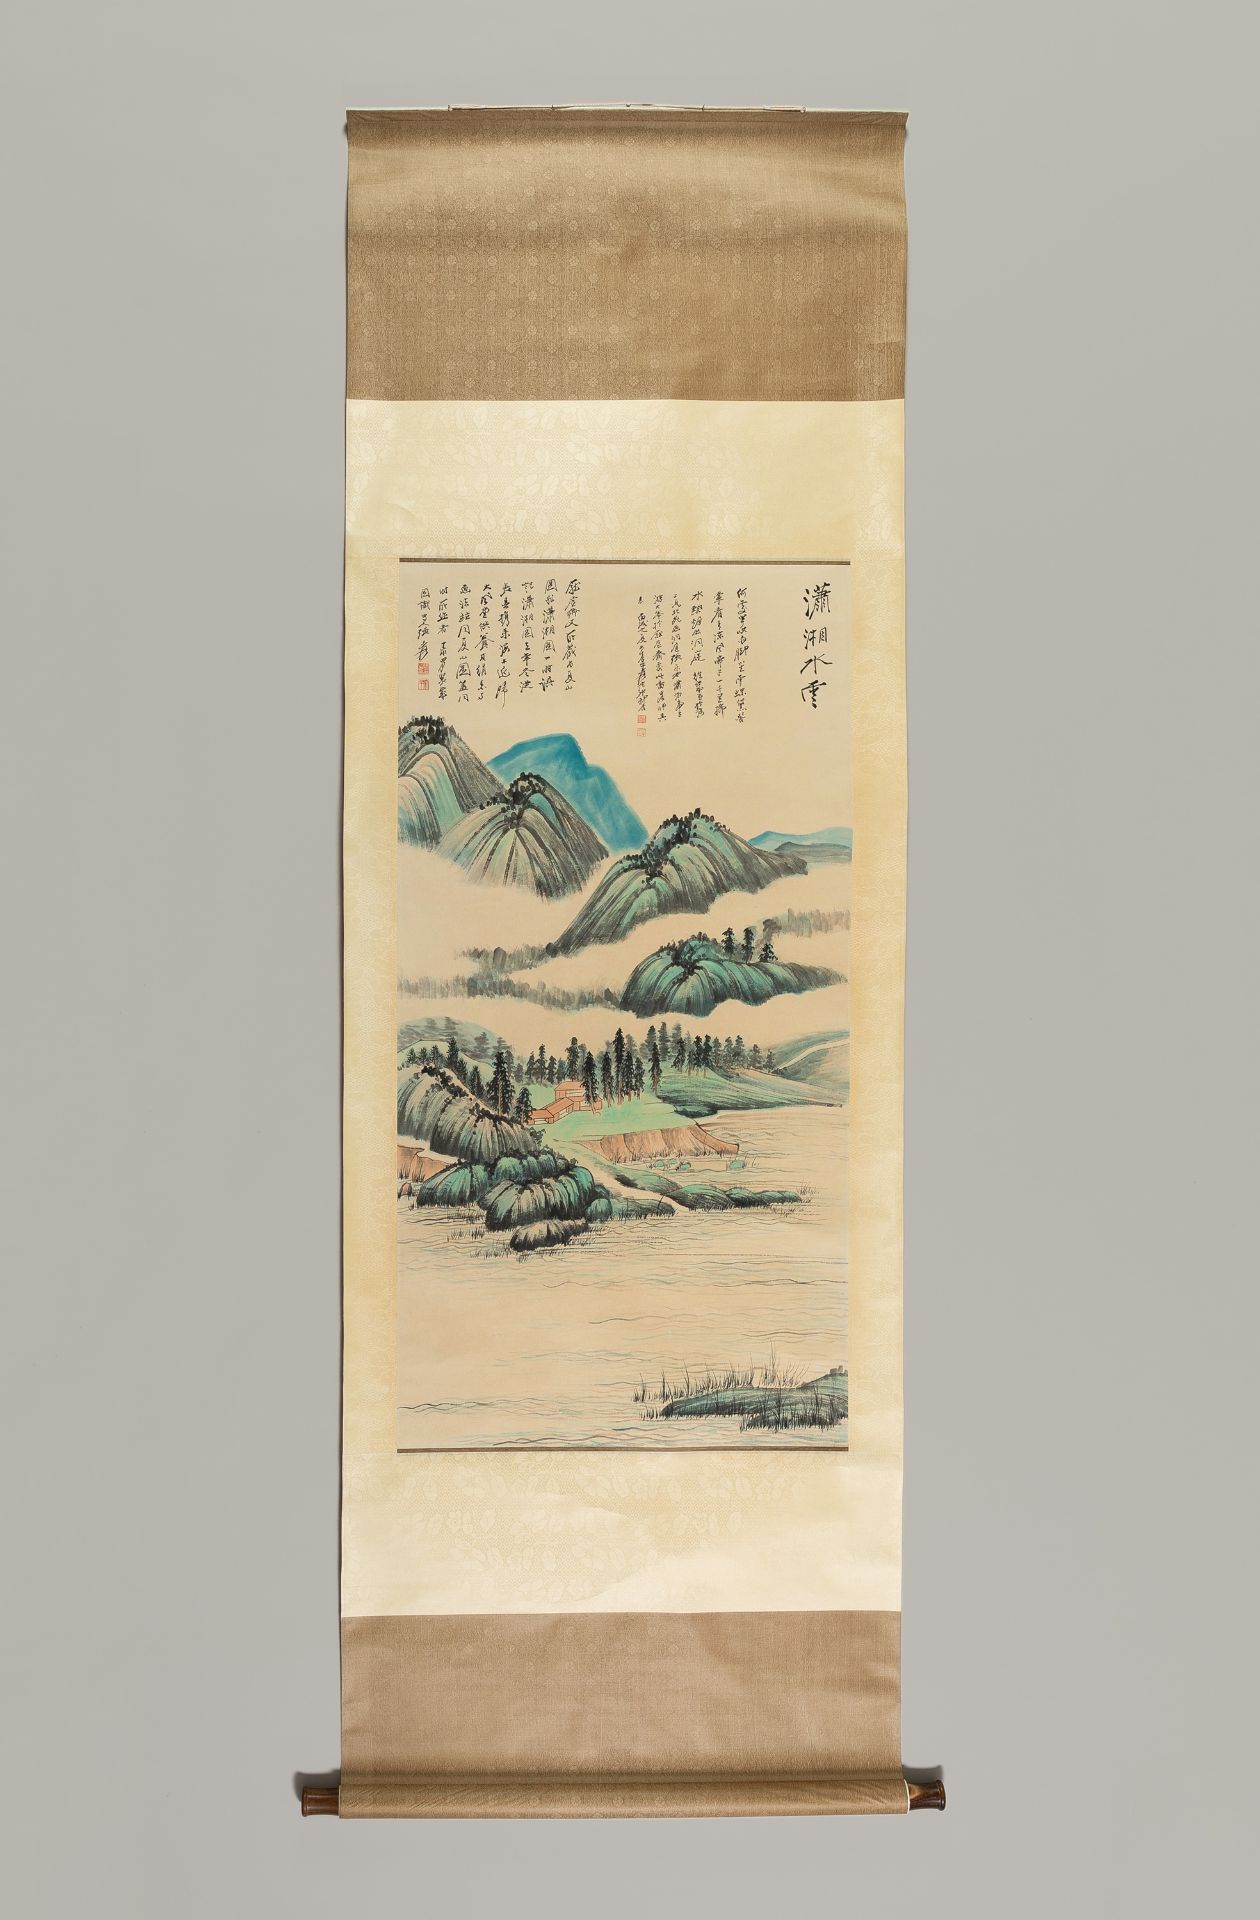 A SCROLL PAINTING OF A LANDSCAPE, AFTER ZHANG DAQIAN - Image 2 of 7